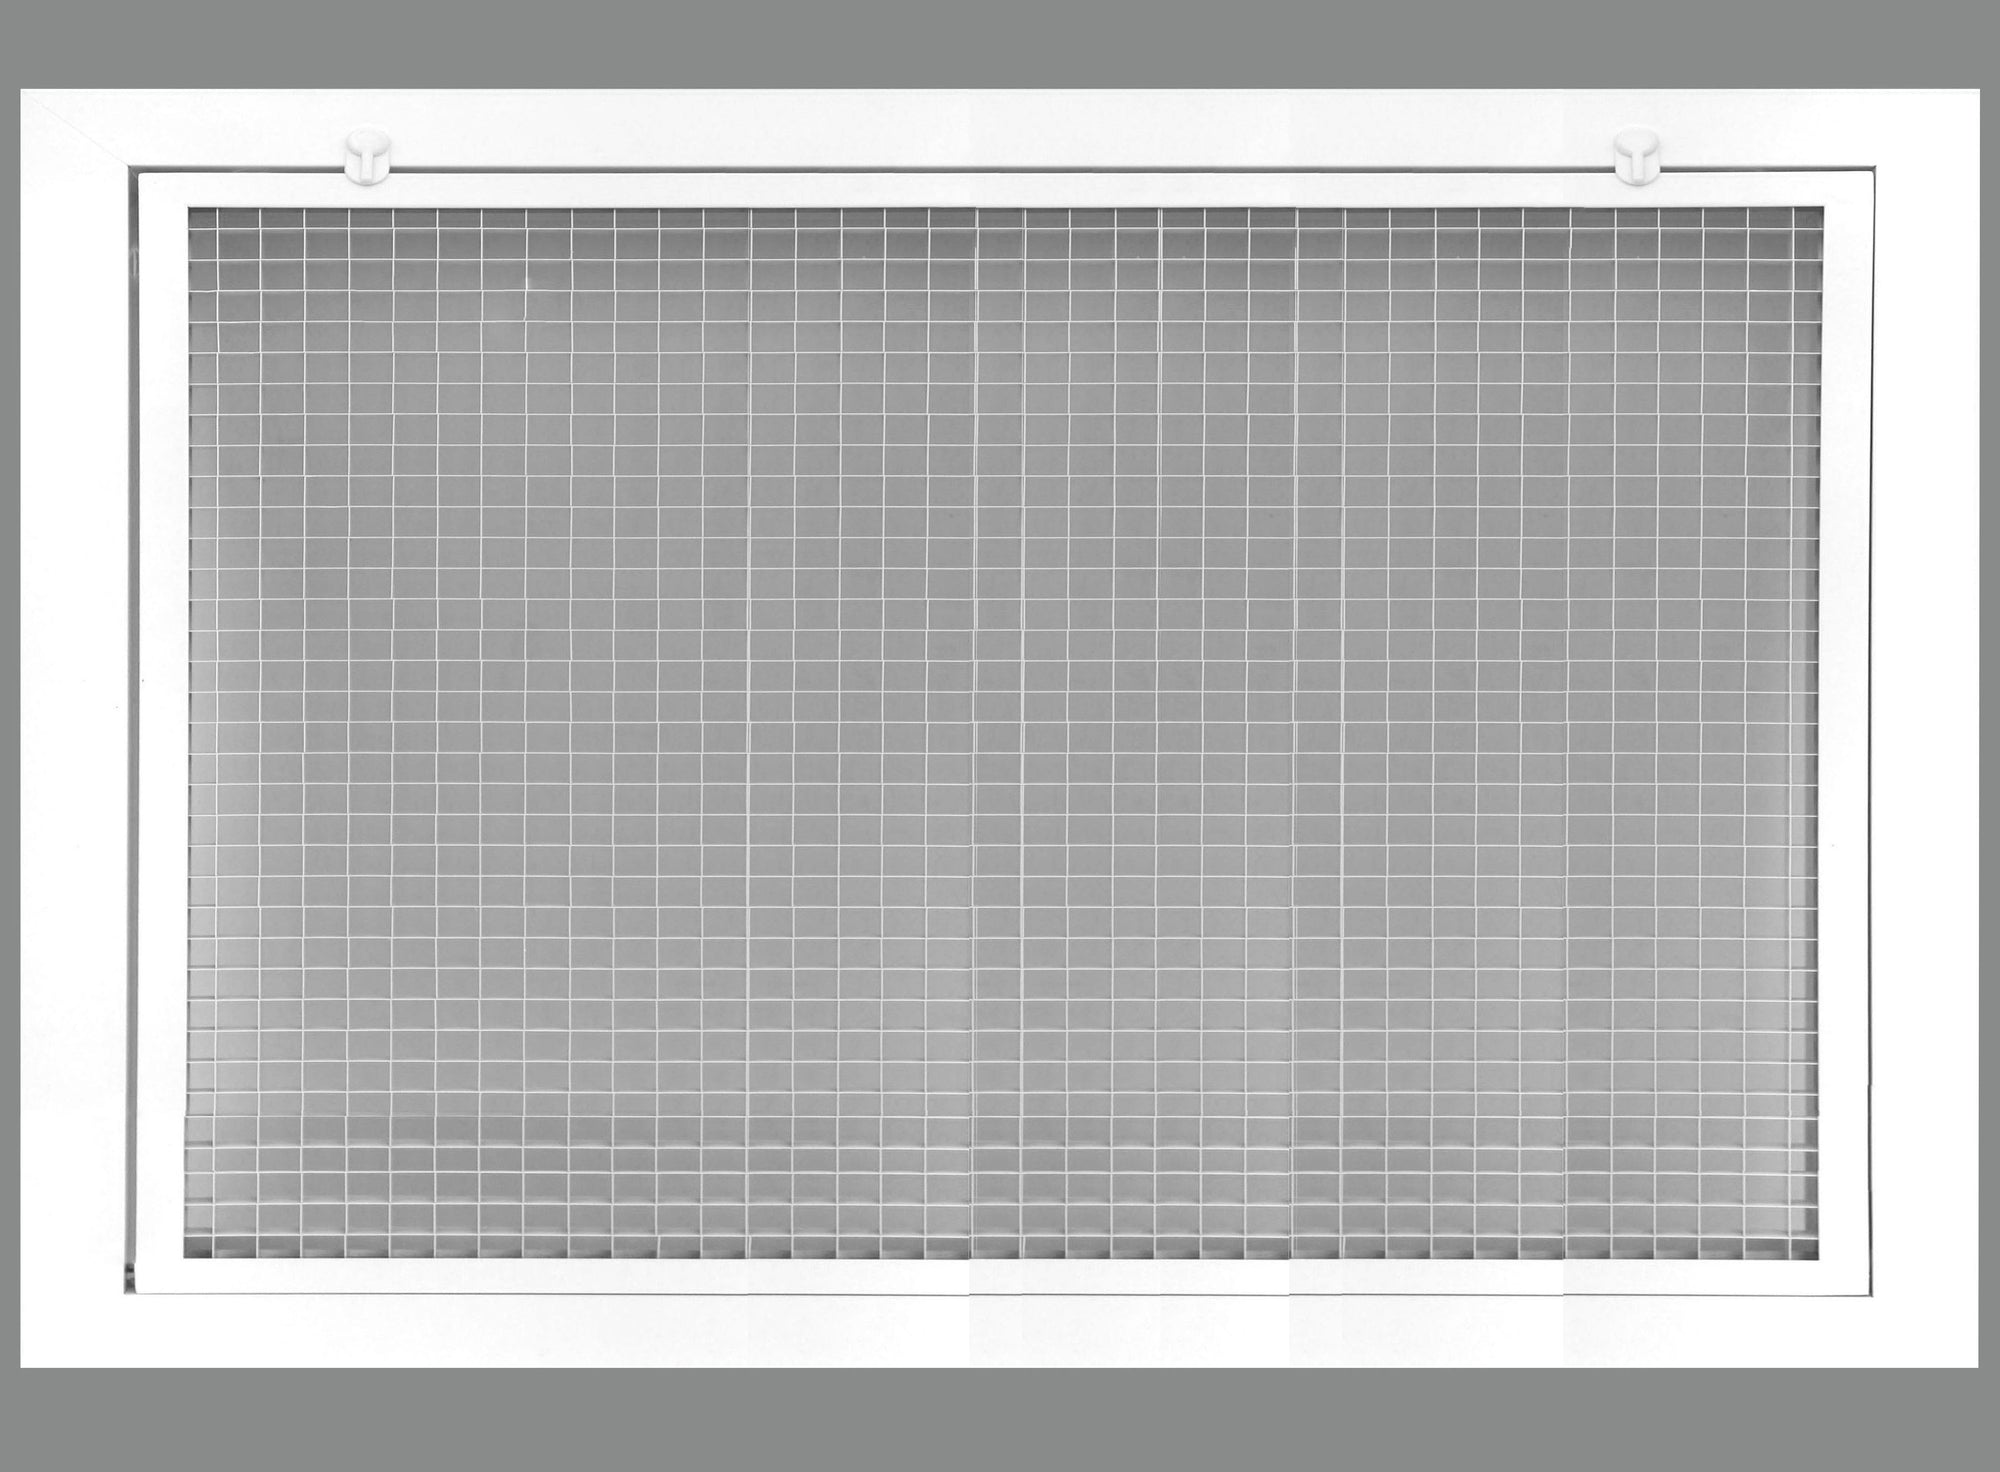 26" x 20" Cube Core Eggcrate Return Air Filter Grille for 1" Filter